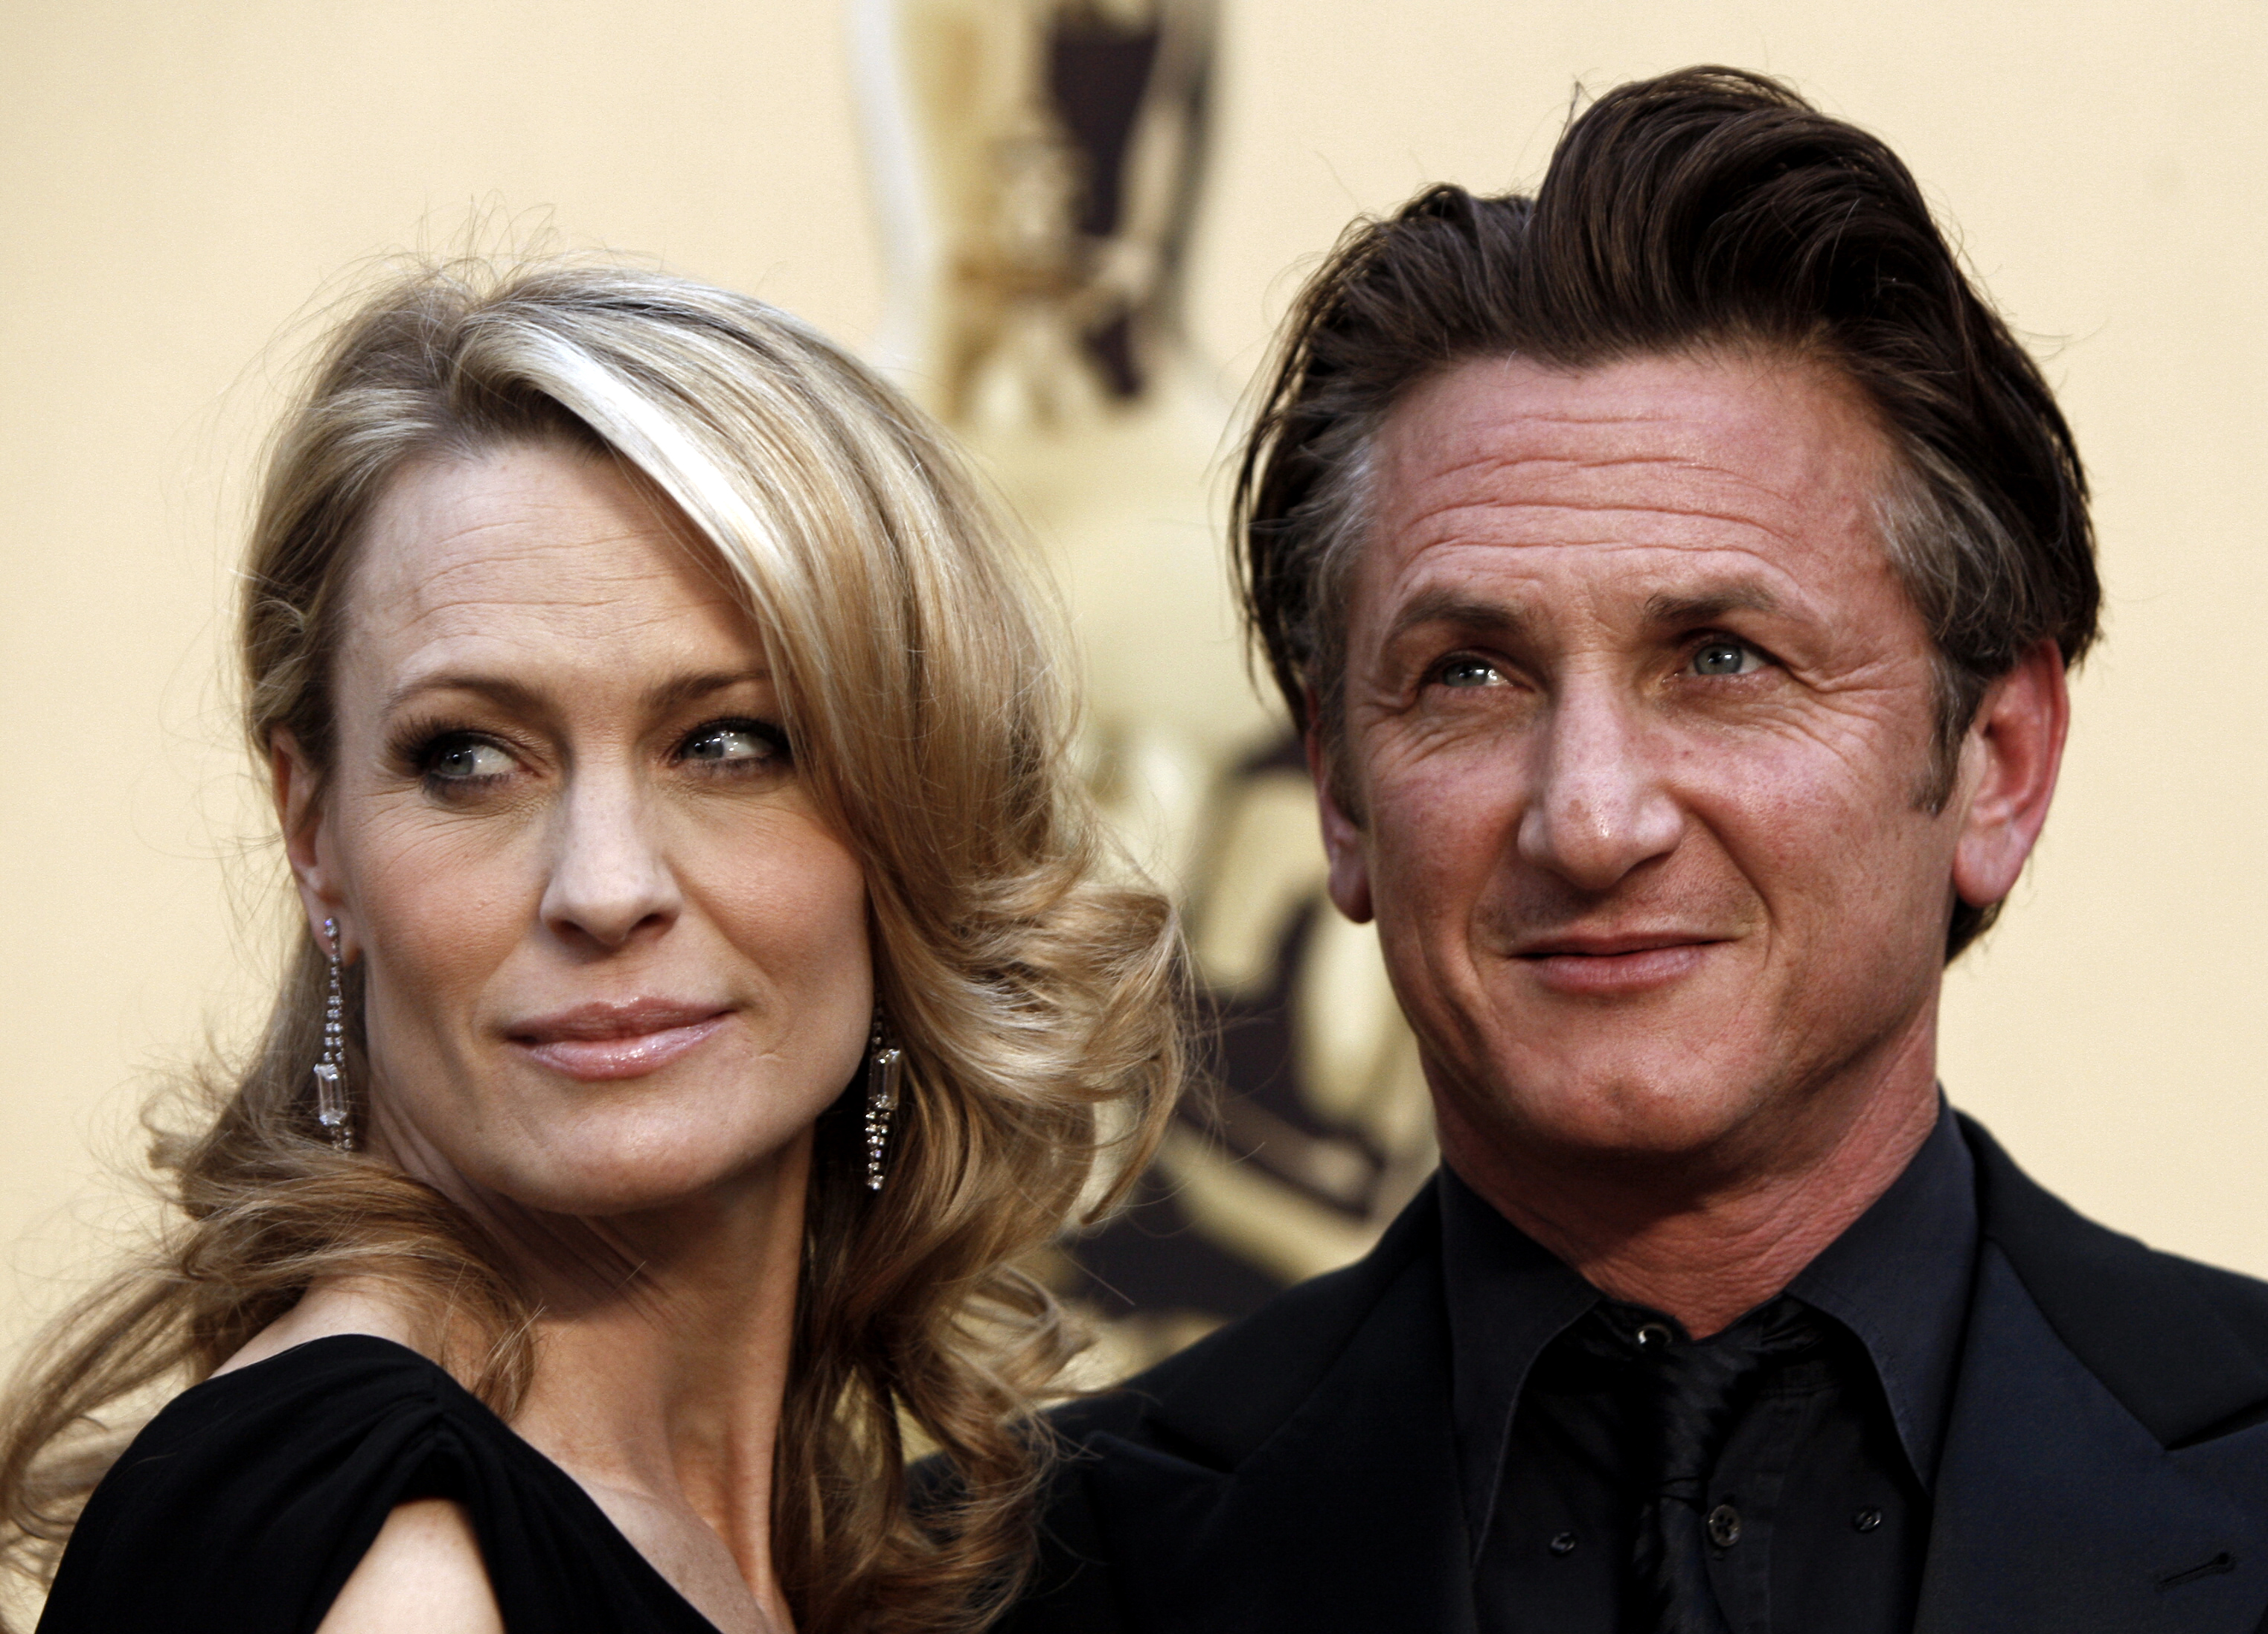 FILE - In this Feb. 22, 2009 file photo, Robin Wright Penn, left, and Sean Penn arrive for the 81st Academy Awards in the Hollywood section of Los Angeles. (AP Photo/Matt Sayles, file)